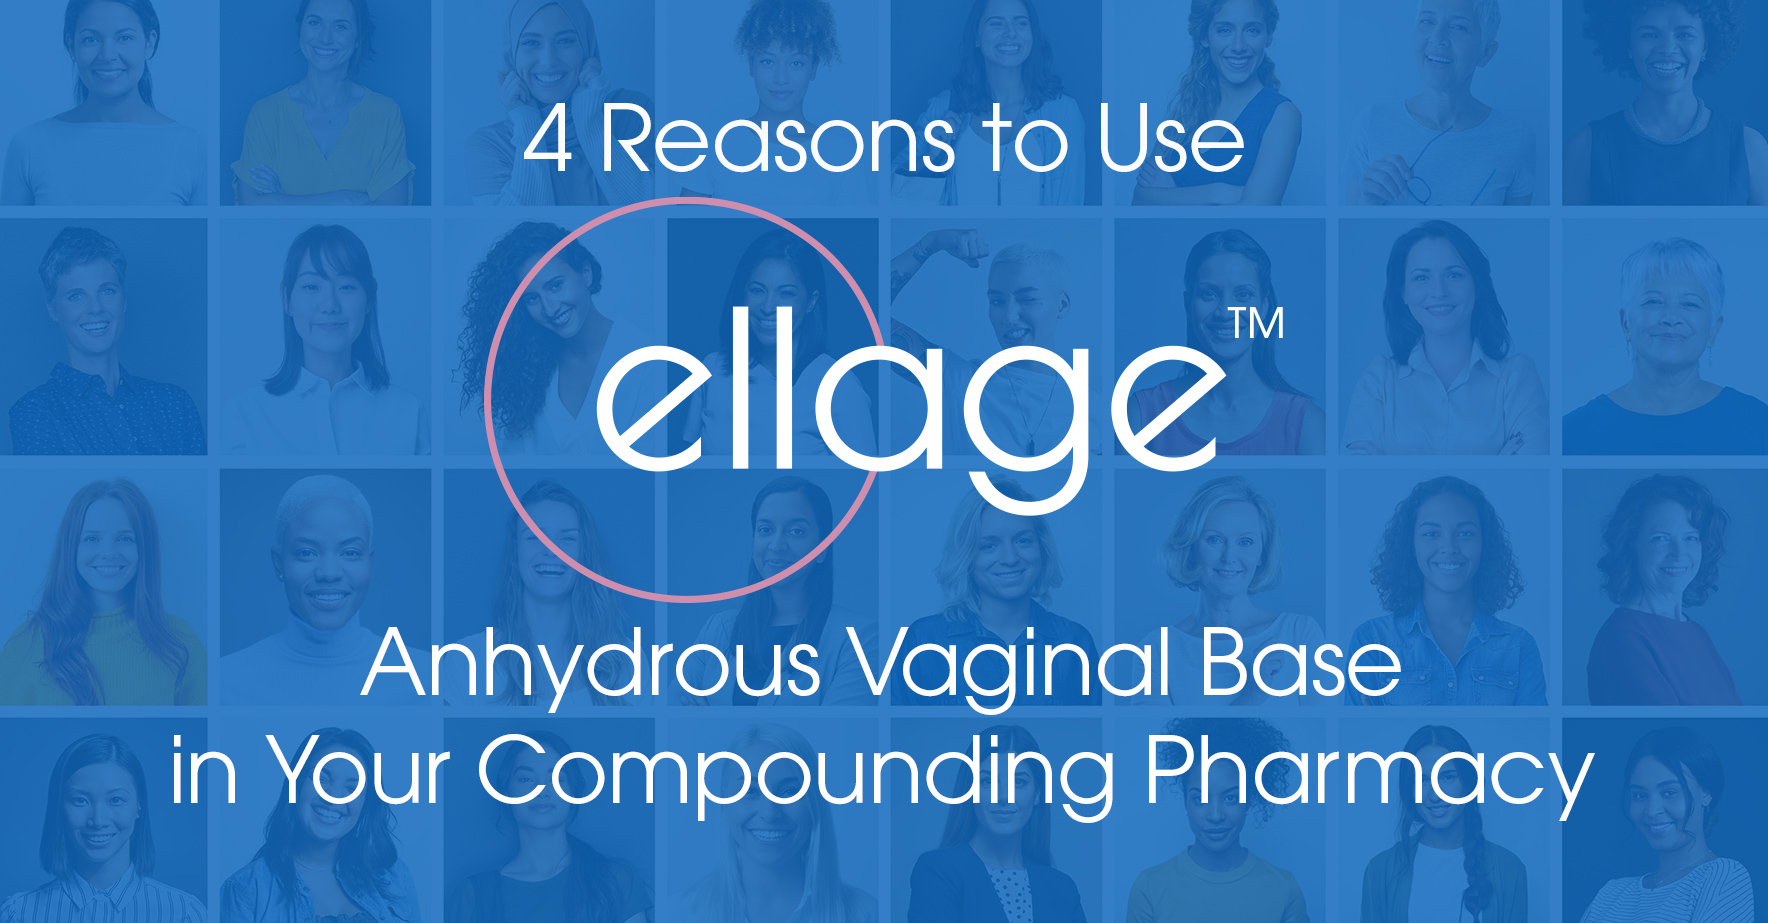 4_REASONS_TO_USE_ELLAGE_ANHYDROUS_VAGINAL_BASE_IN_YOUR_COMPOUND_PHARAMACY.JPG.